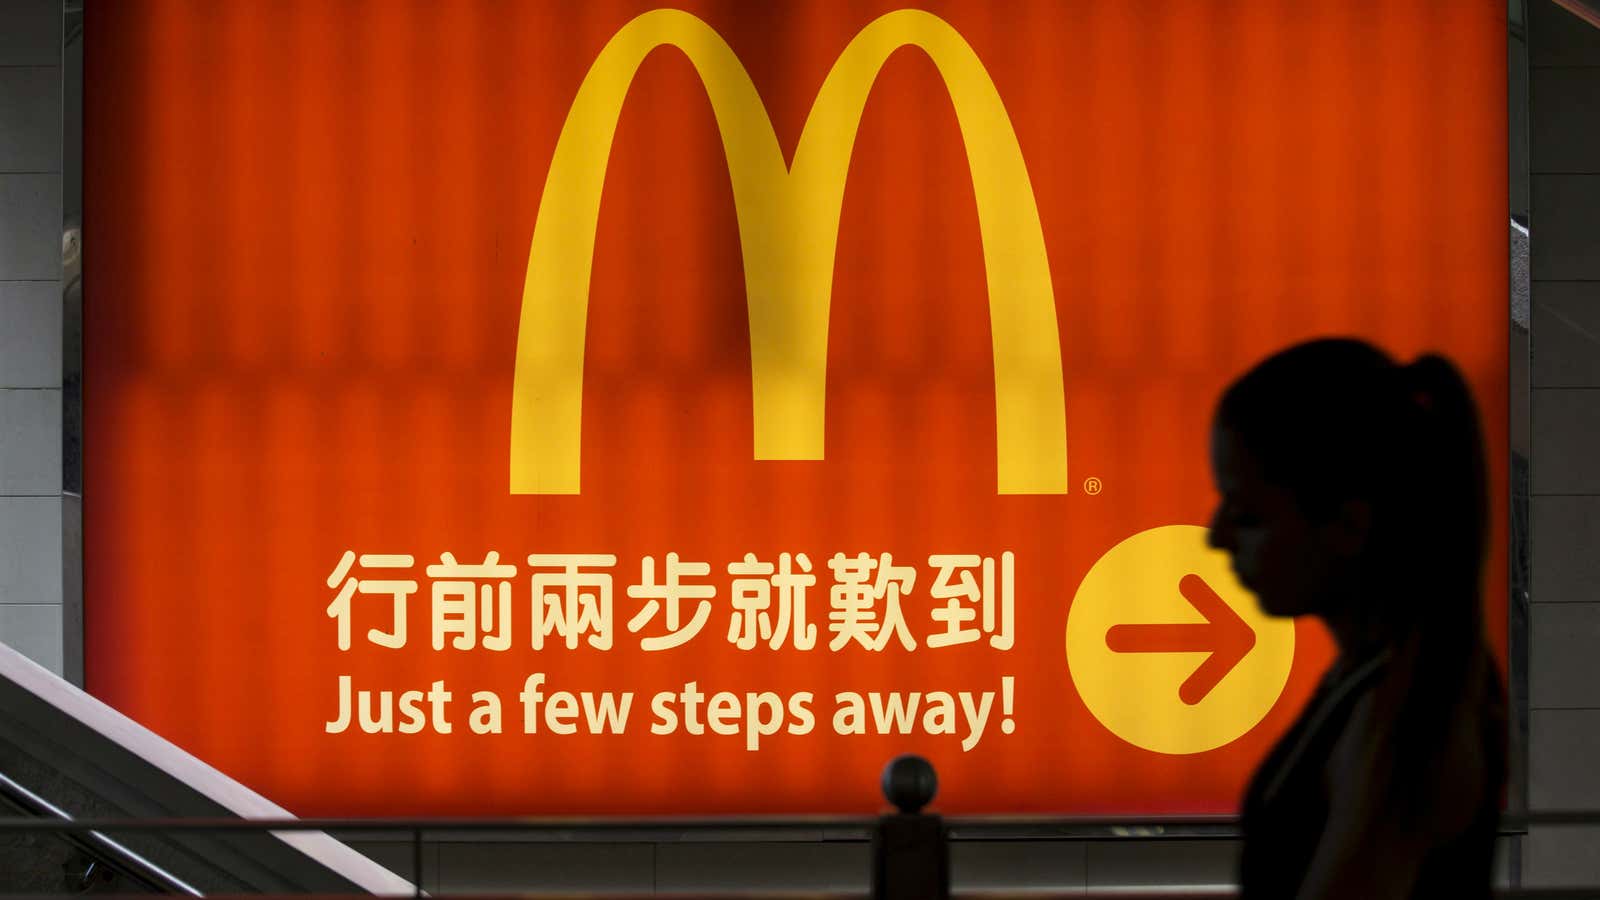 Chasing elusive growth in China, McDonald’s cedes power to franchisees